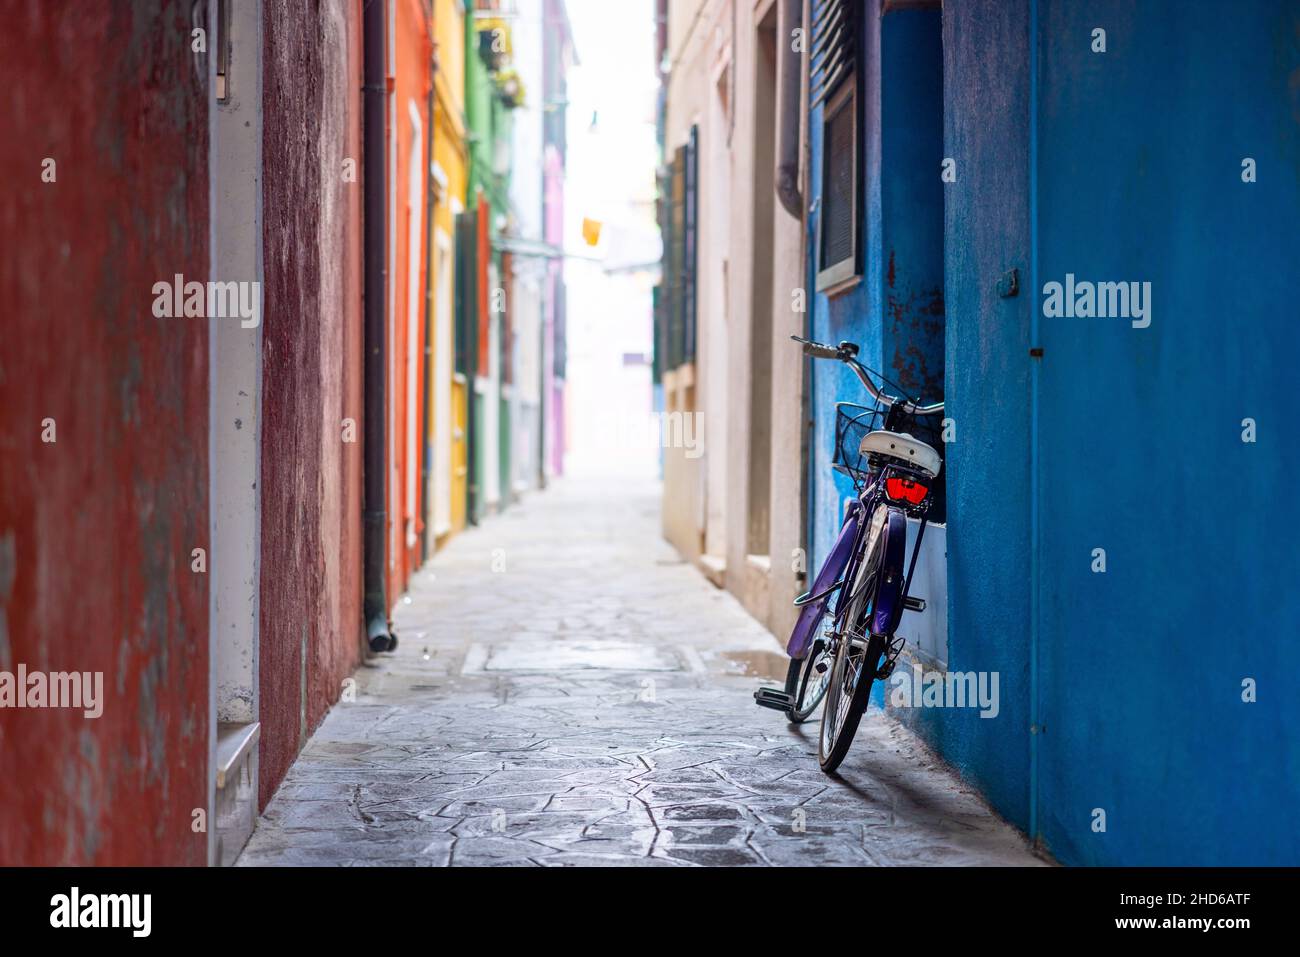 A purple bicycle is left leaning on a blue wall in a colorful backalley in Burano Stock Photo